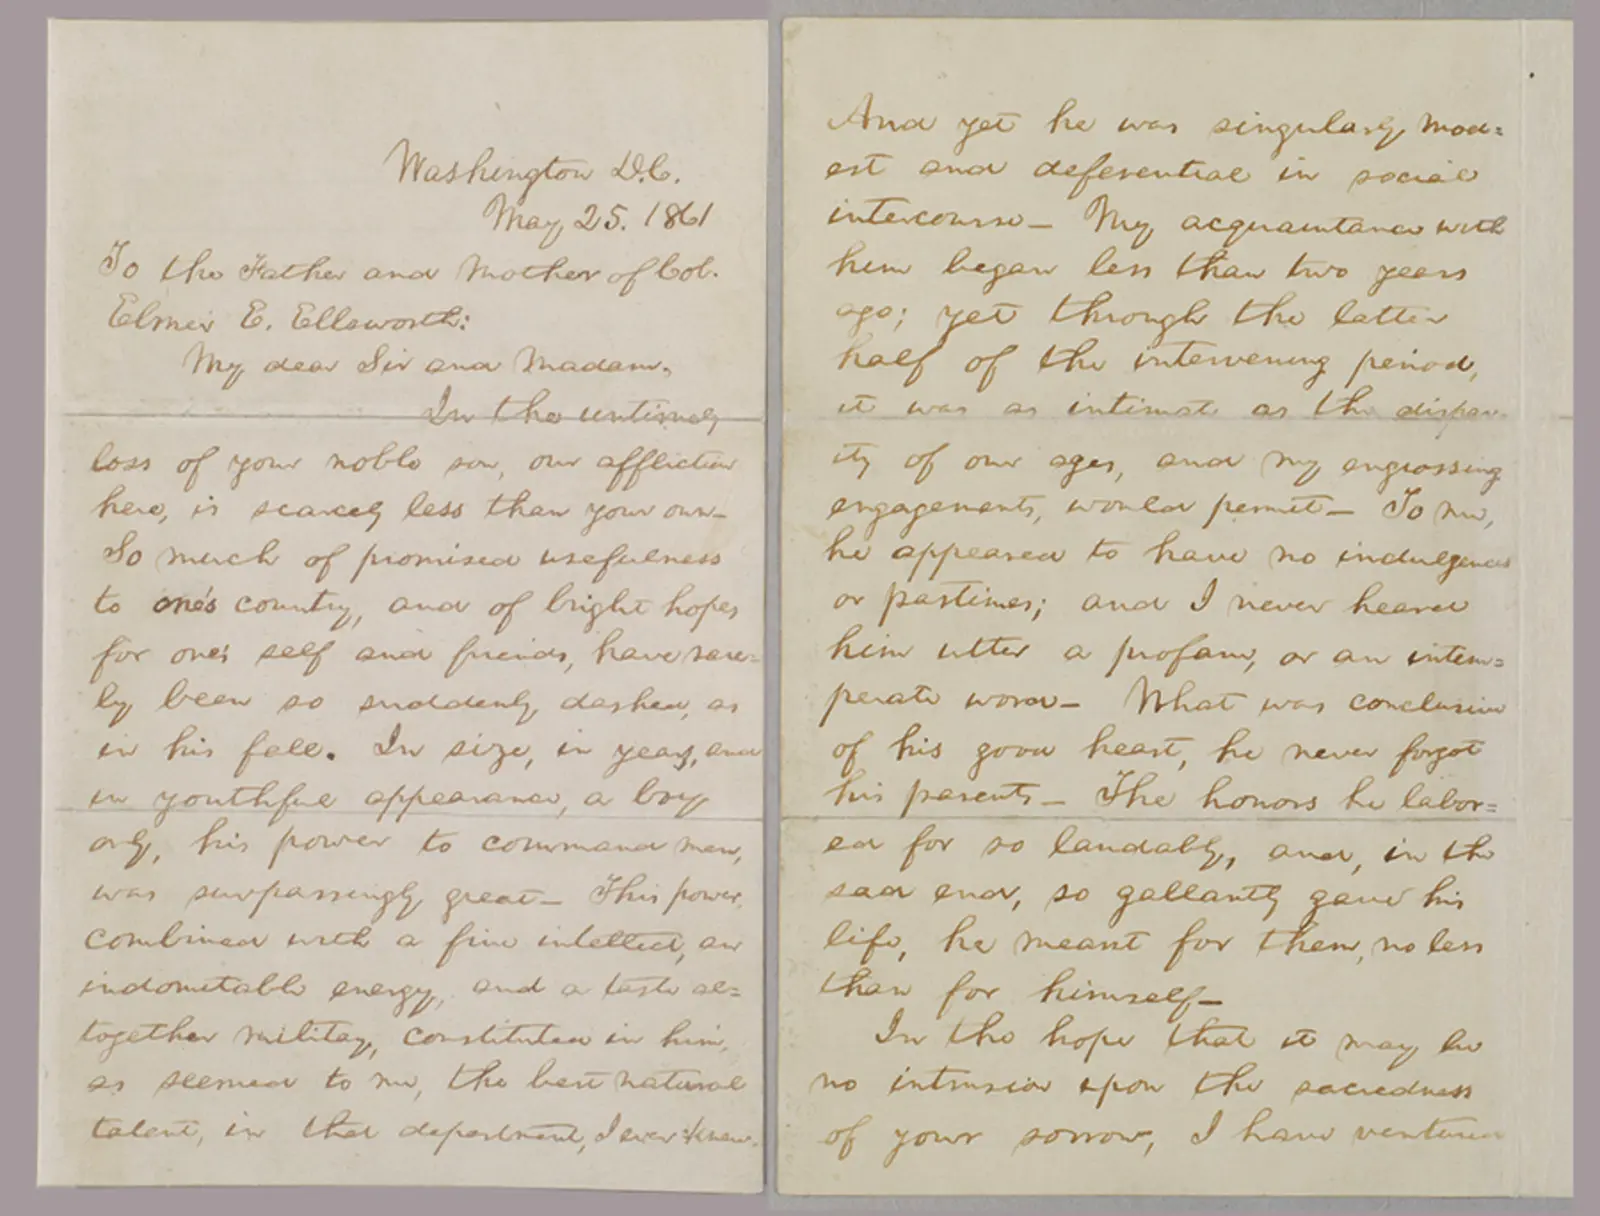 President Abraham Lincoln’s letter of condolence